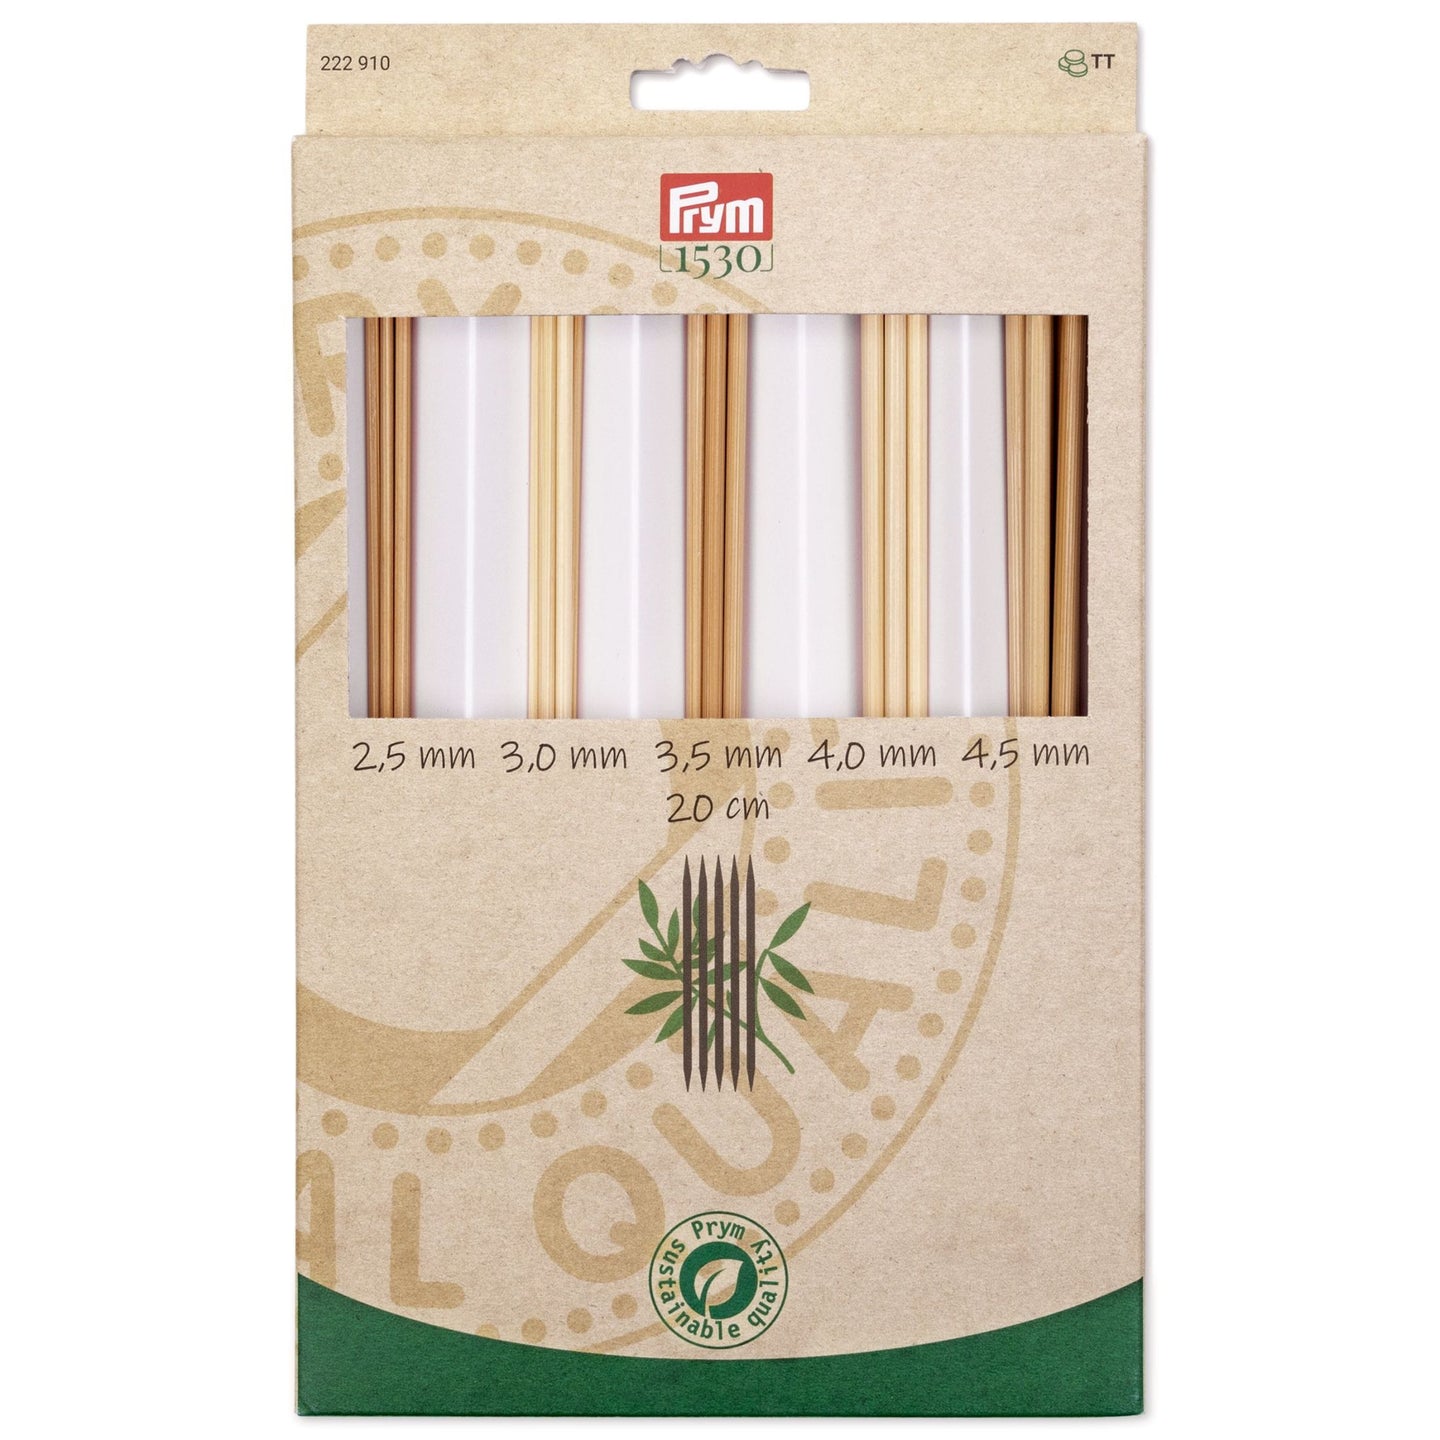 Double Pointed Knitting Needles Set - Buy today